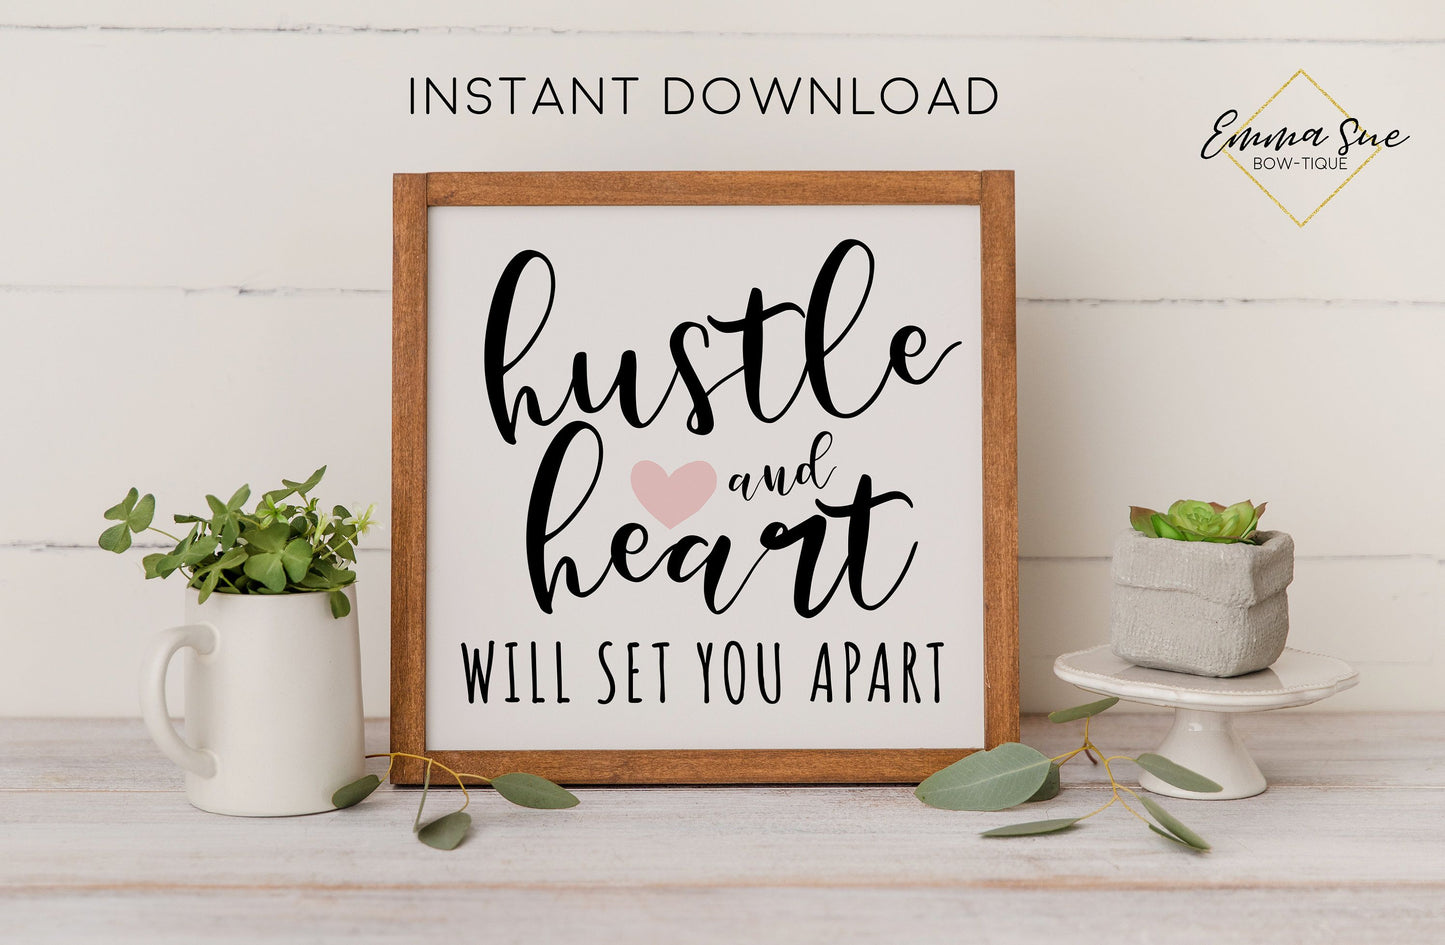 Hustle and heart will set you apart - Confidence Boss Quotes Motivational Quote Printable Sign Wall Art